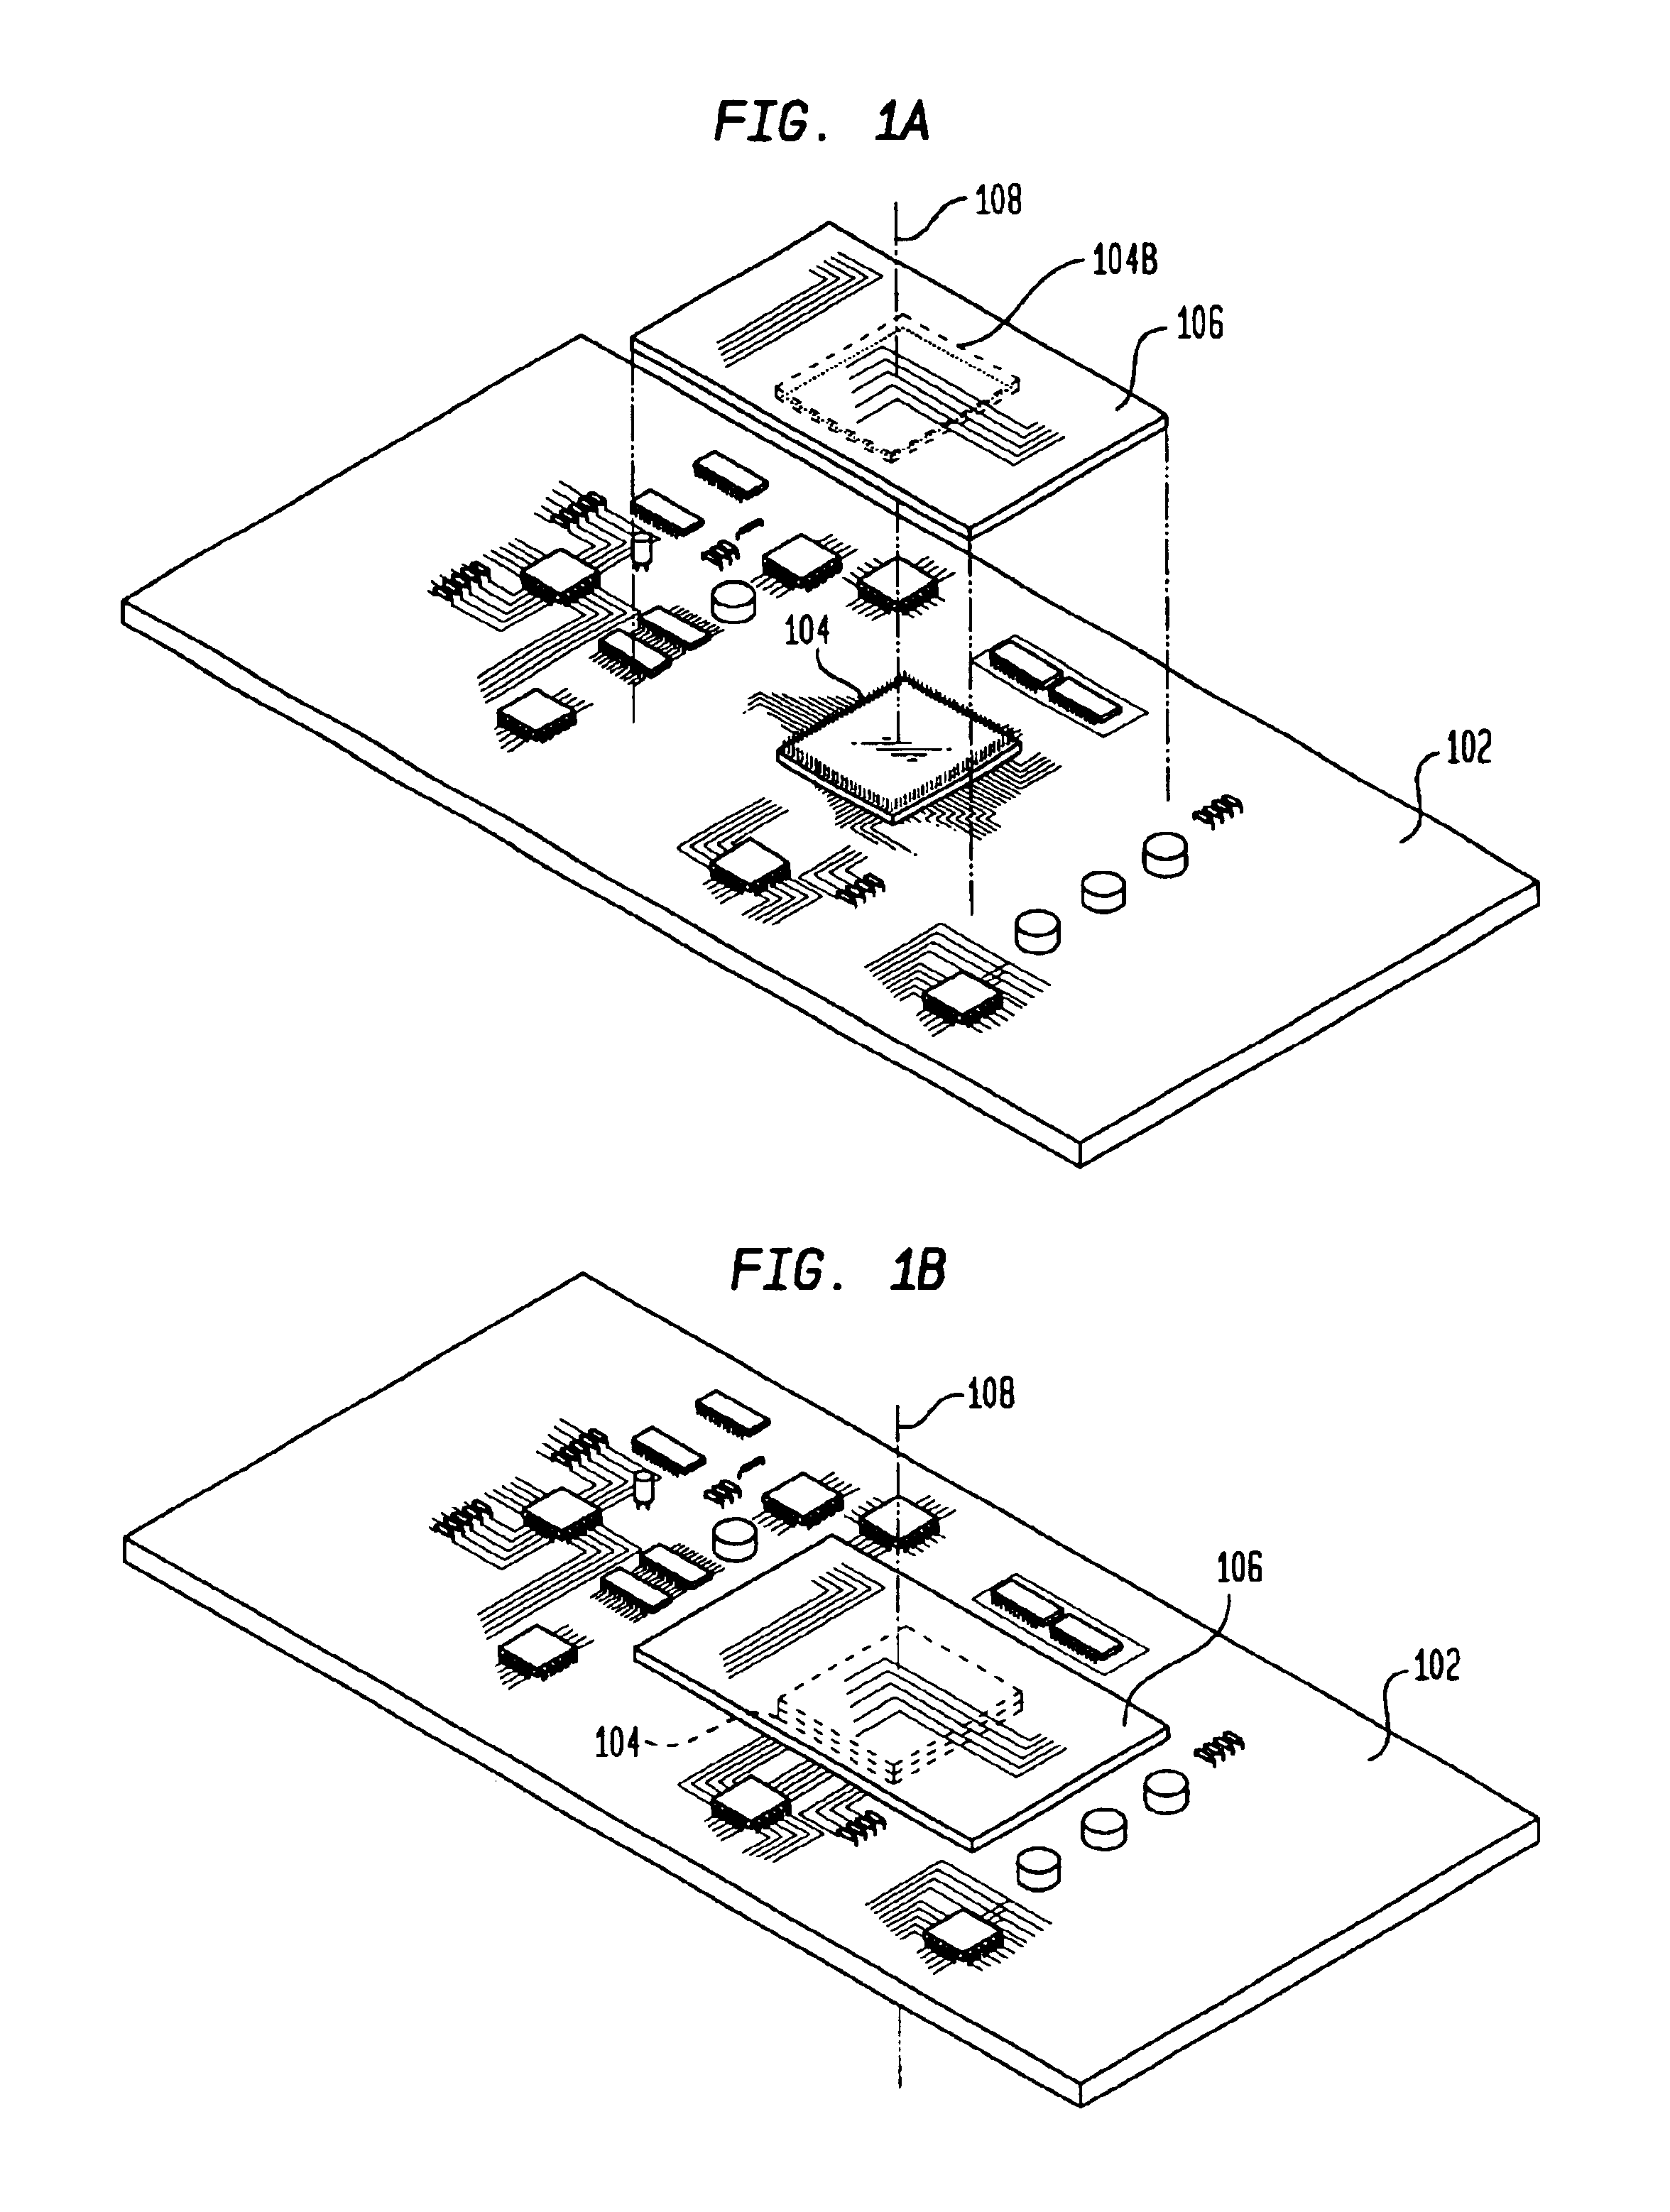 Attachment plate for directly mating circuit boards